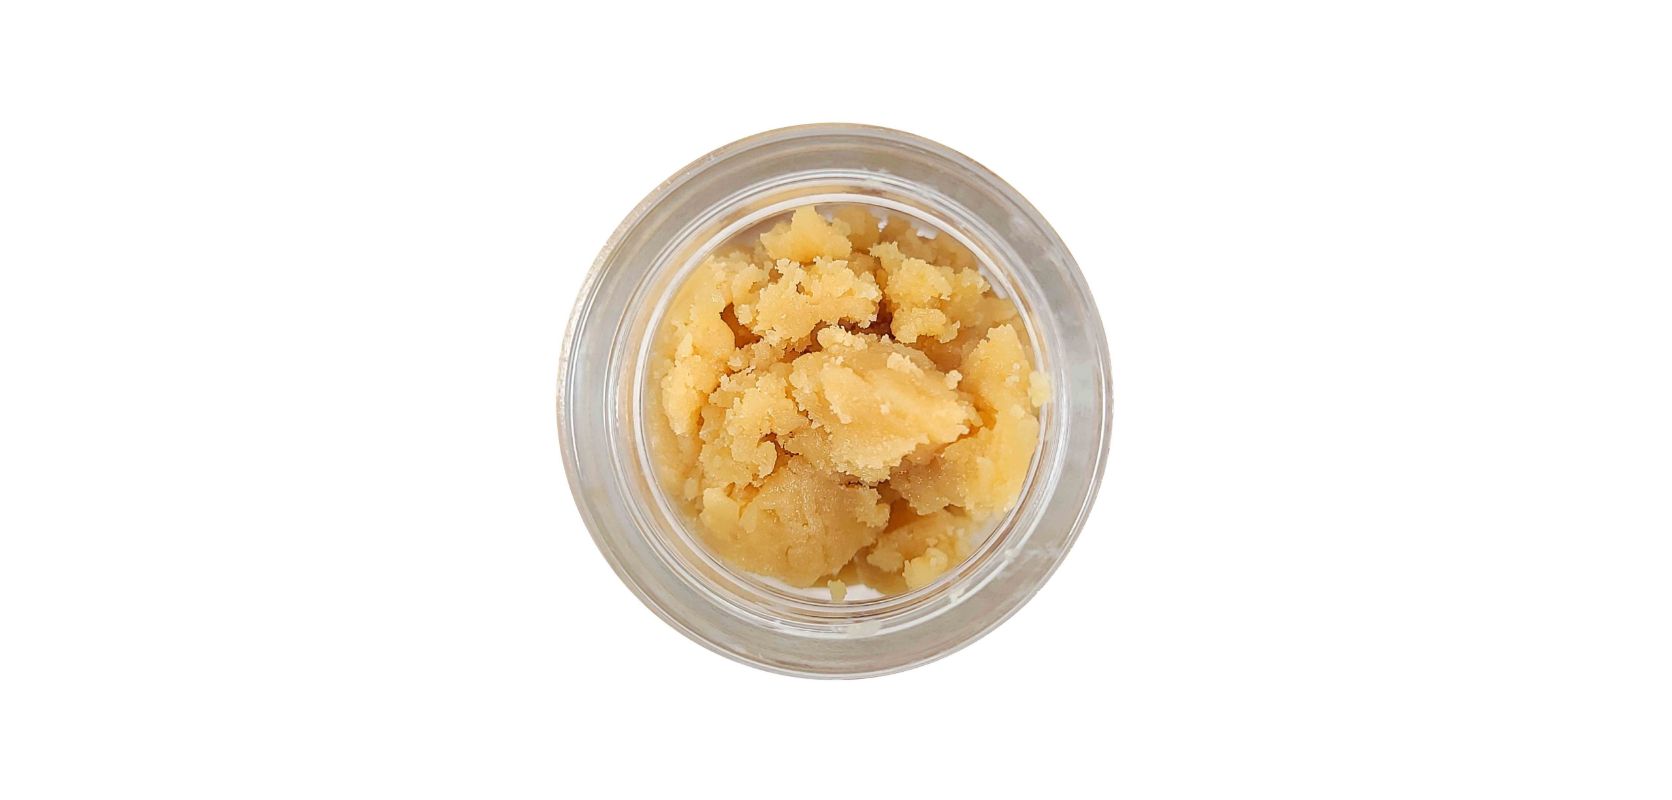 Buy budder online in Canada to experience the potent effects and cannabis’ rich flavour. 